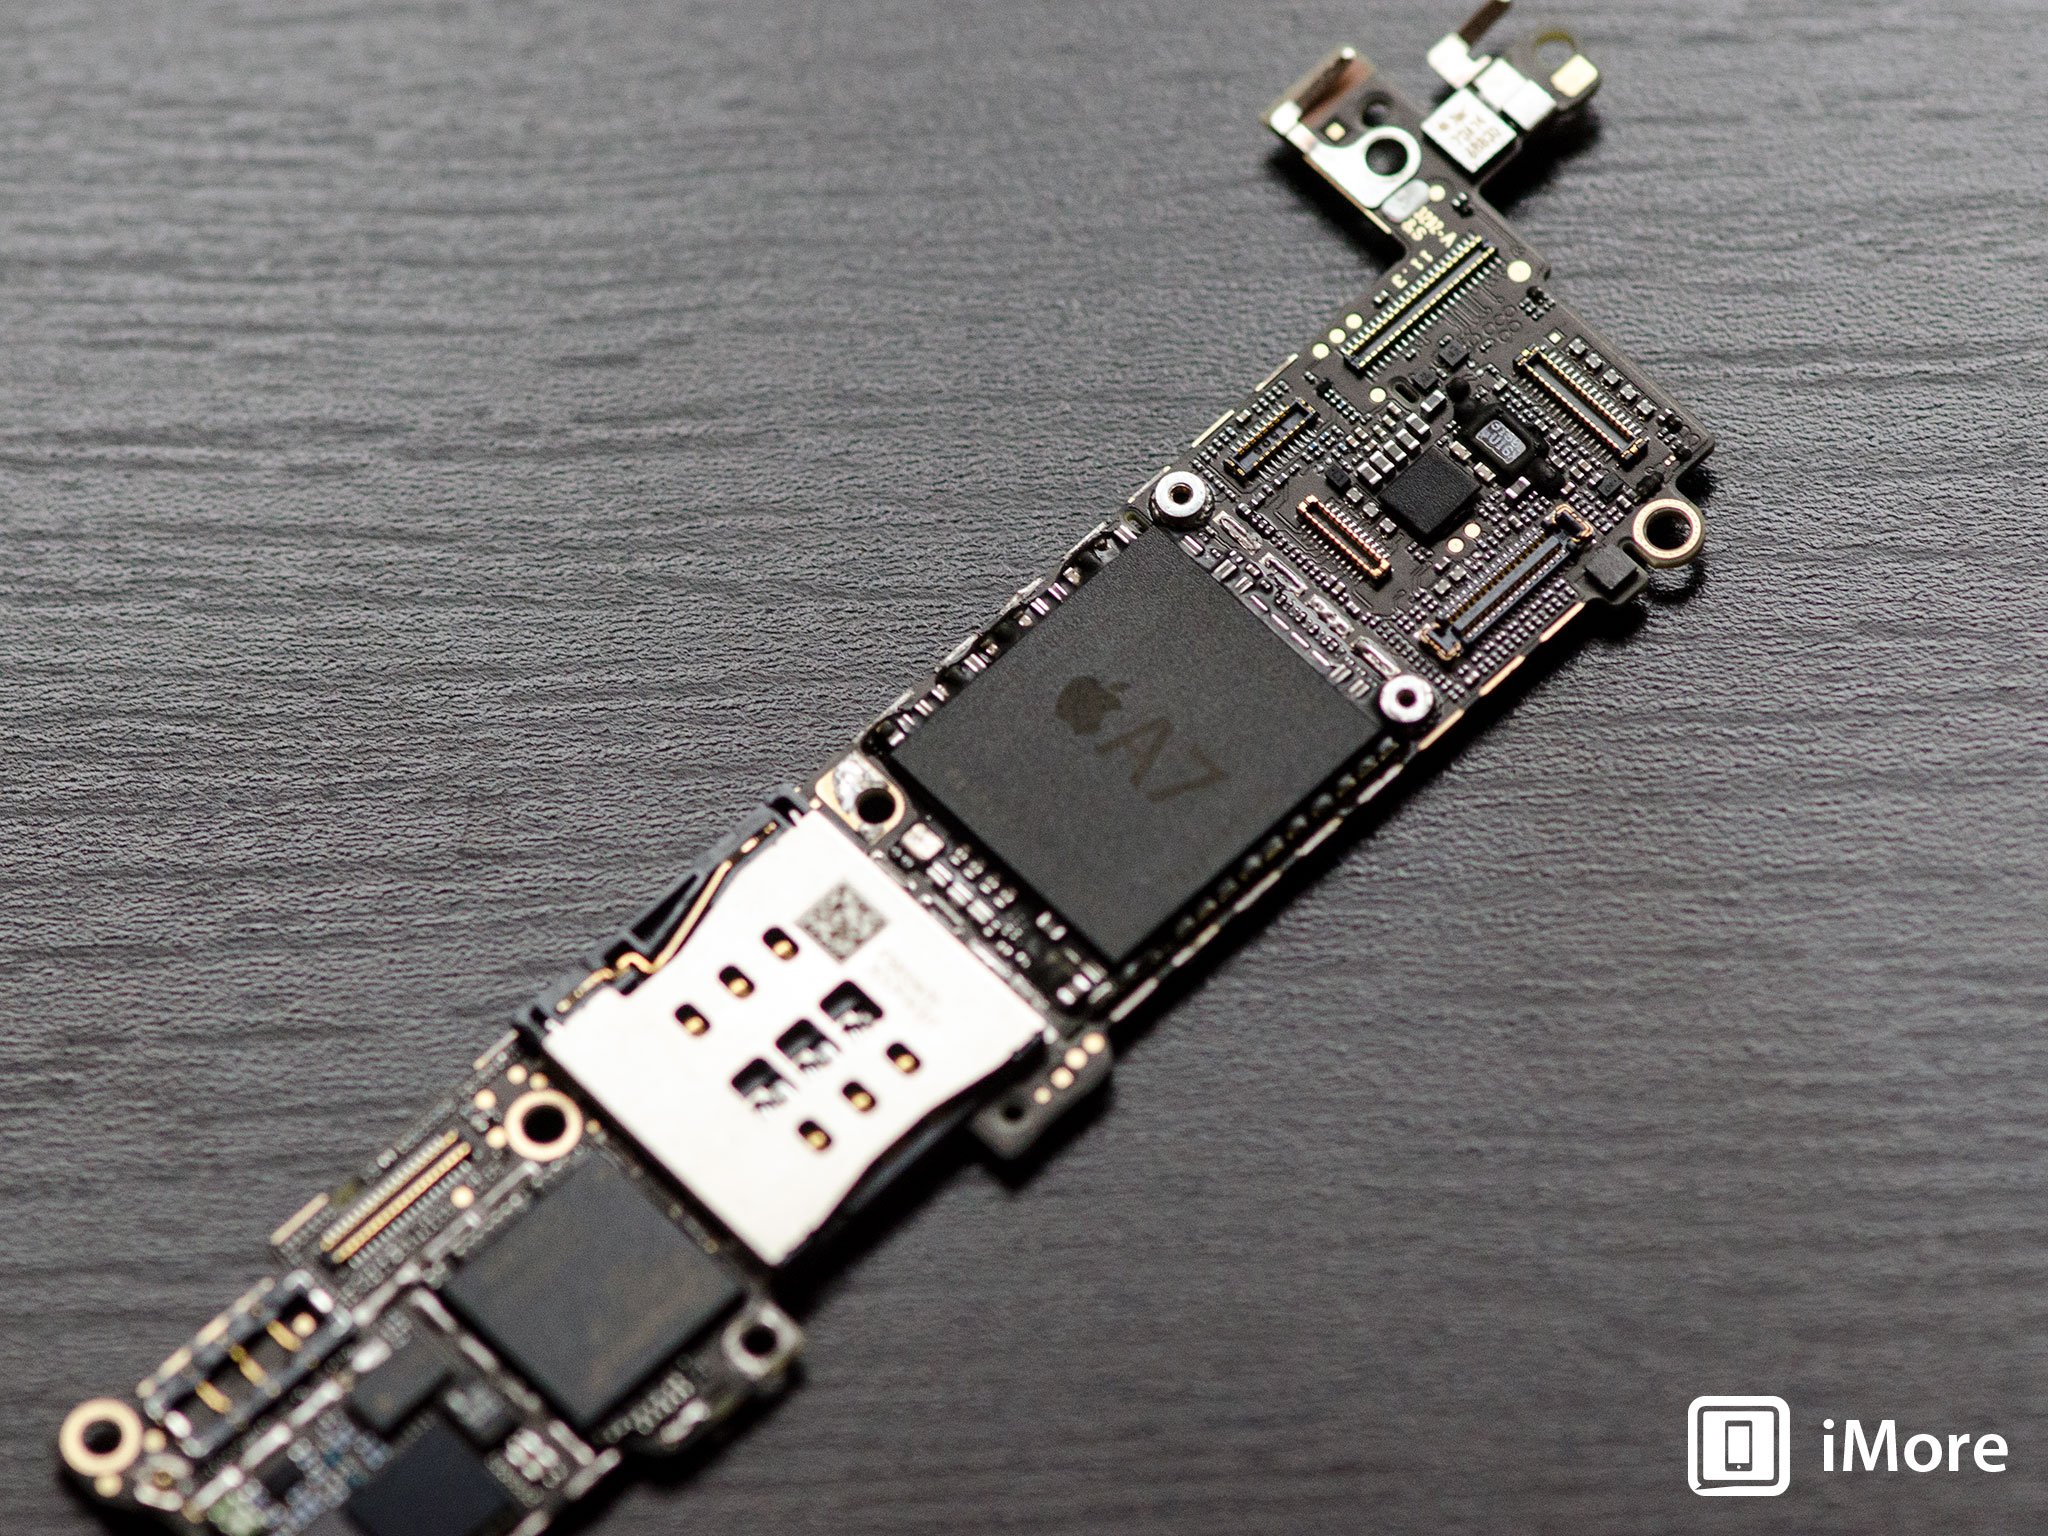 The iPhone 5s logic board on the front side